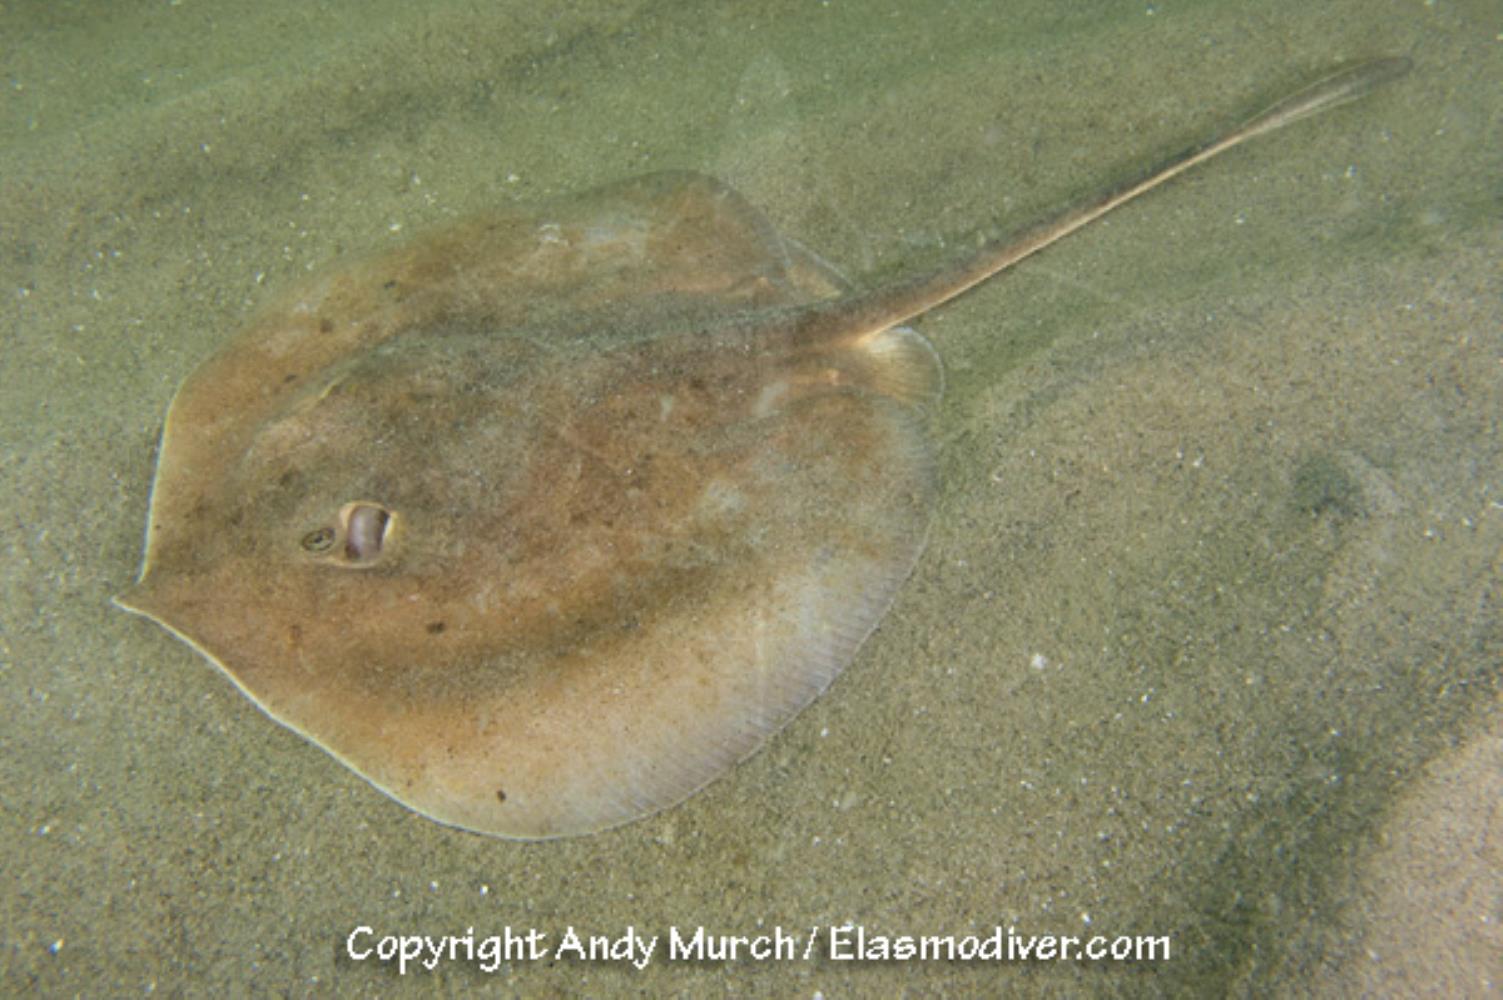 Rogers' Round Ray